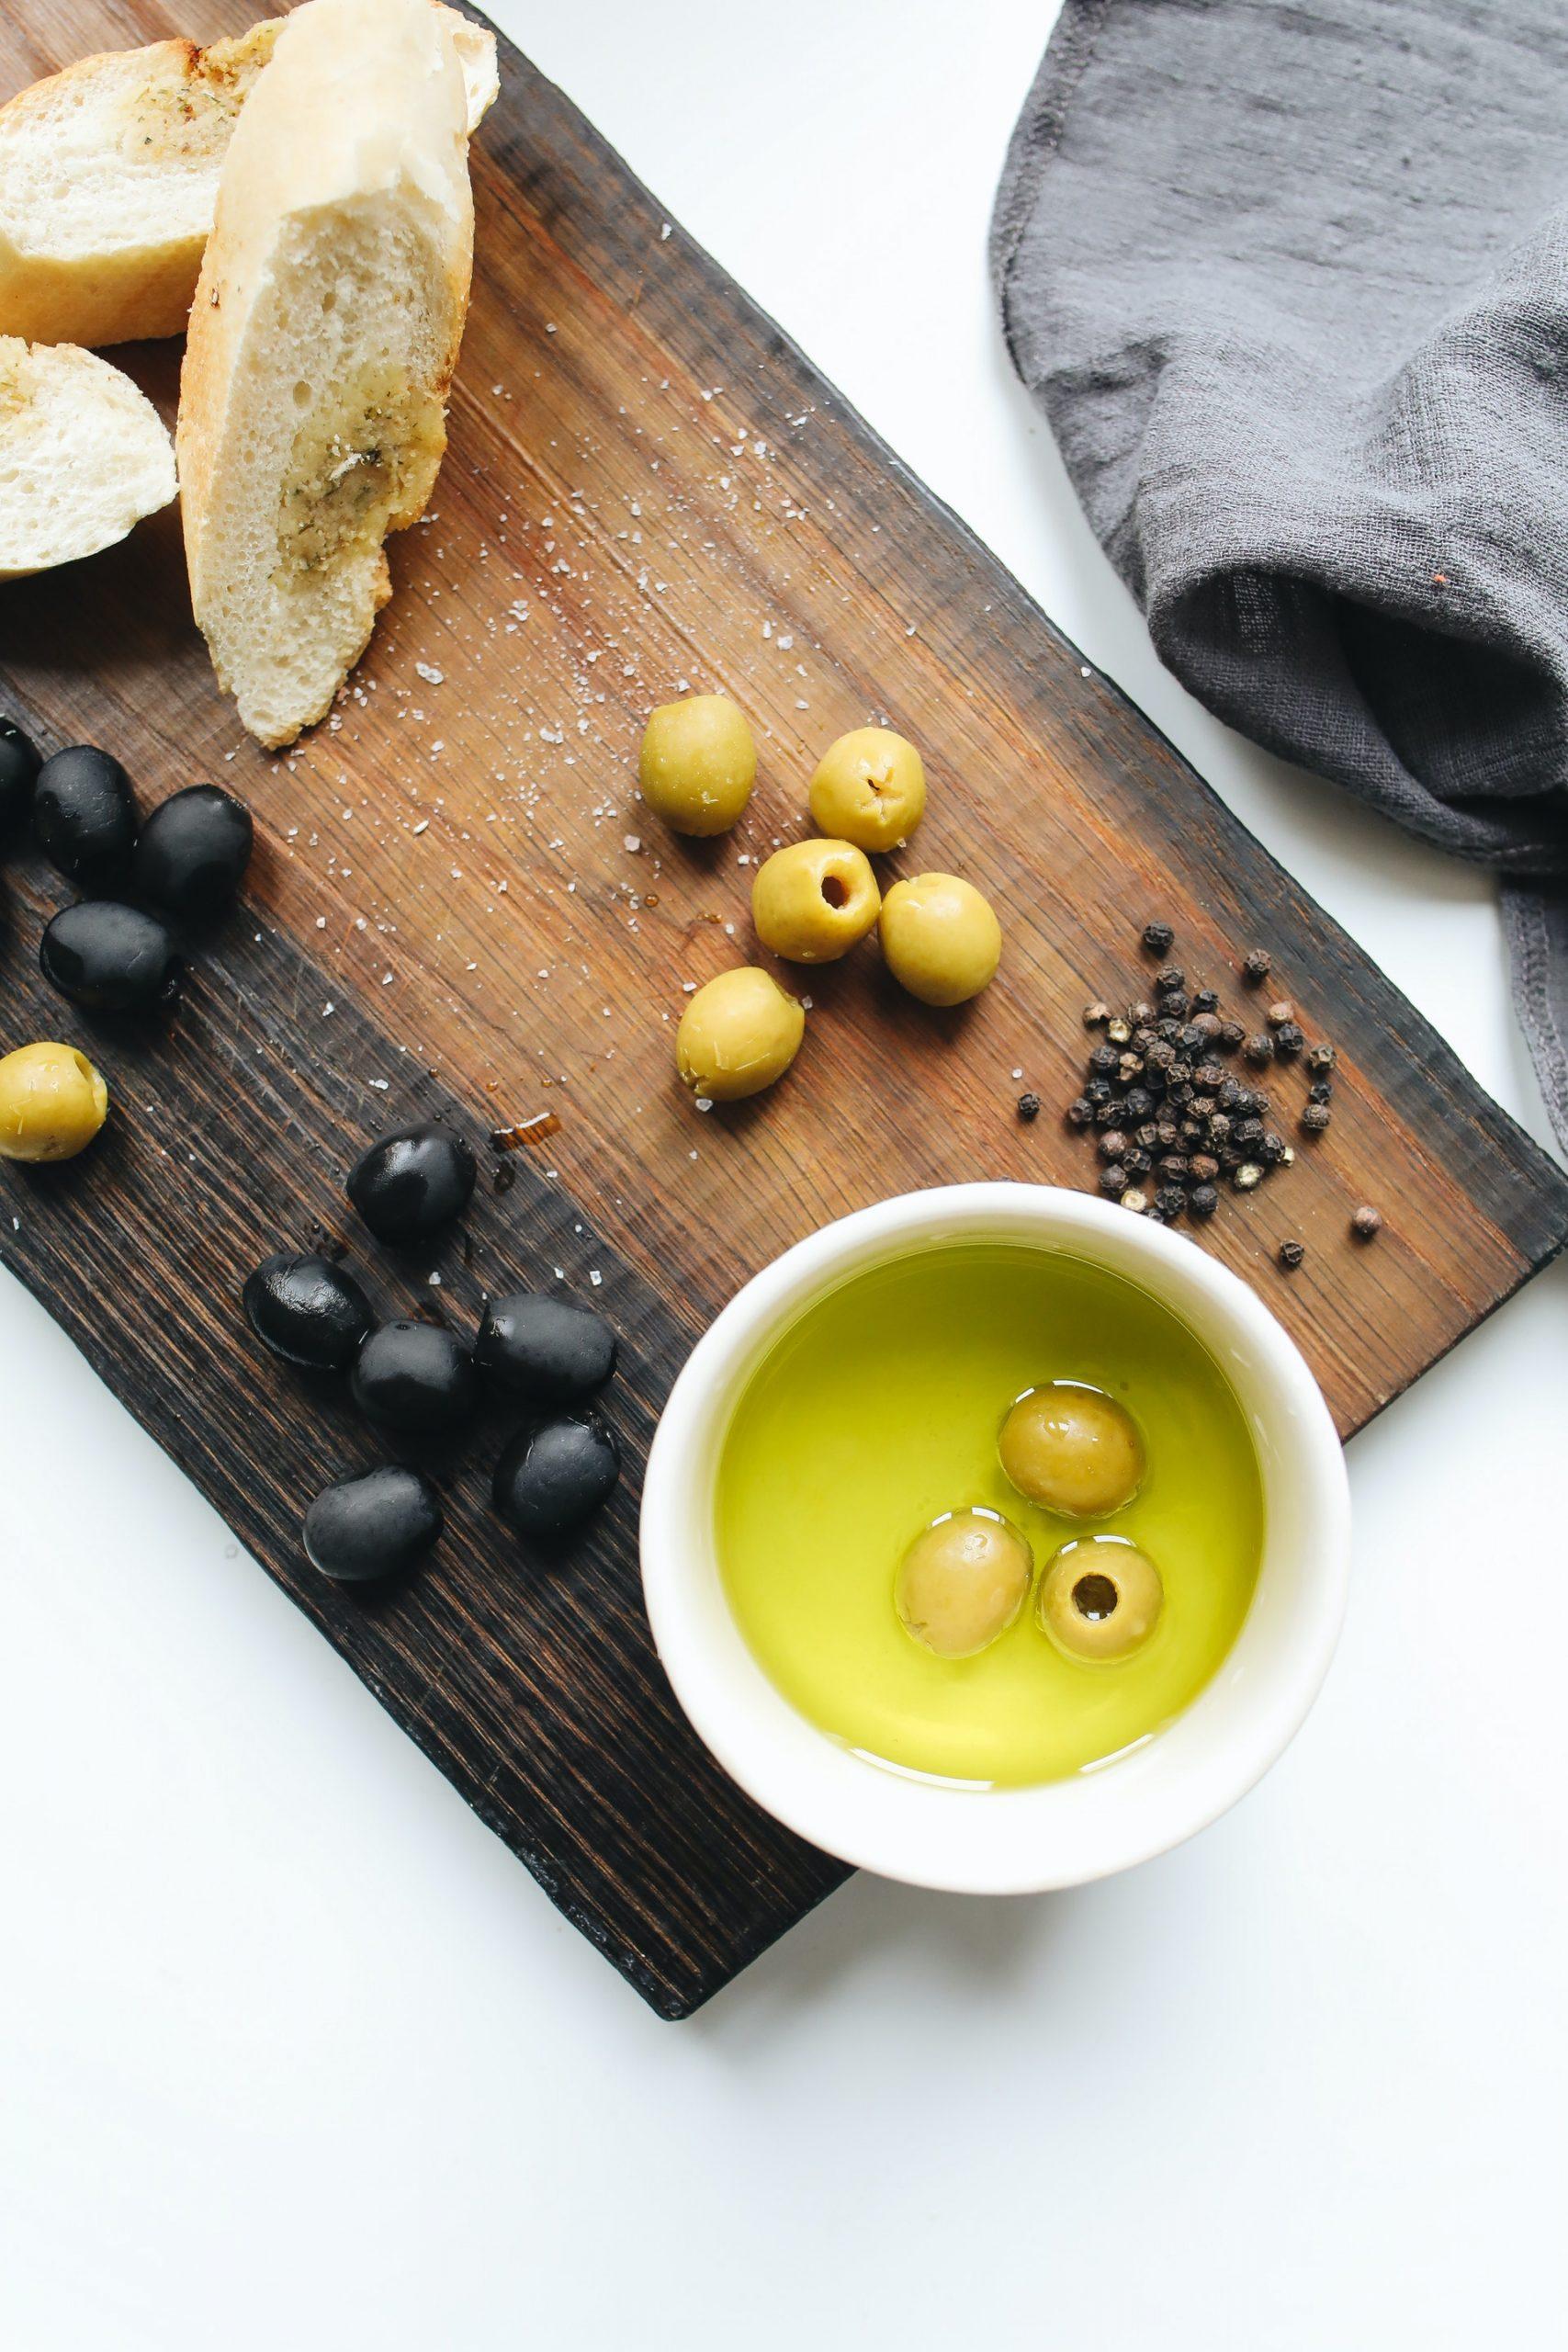 10 Health Benefits of Extra Virgin Olive Oil